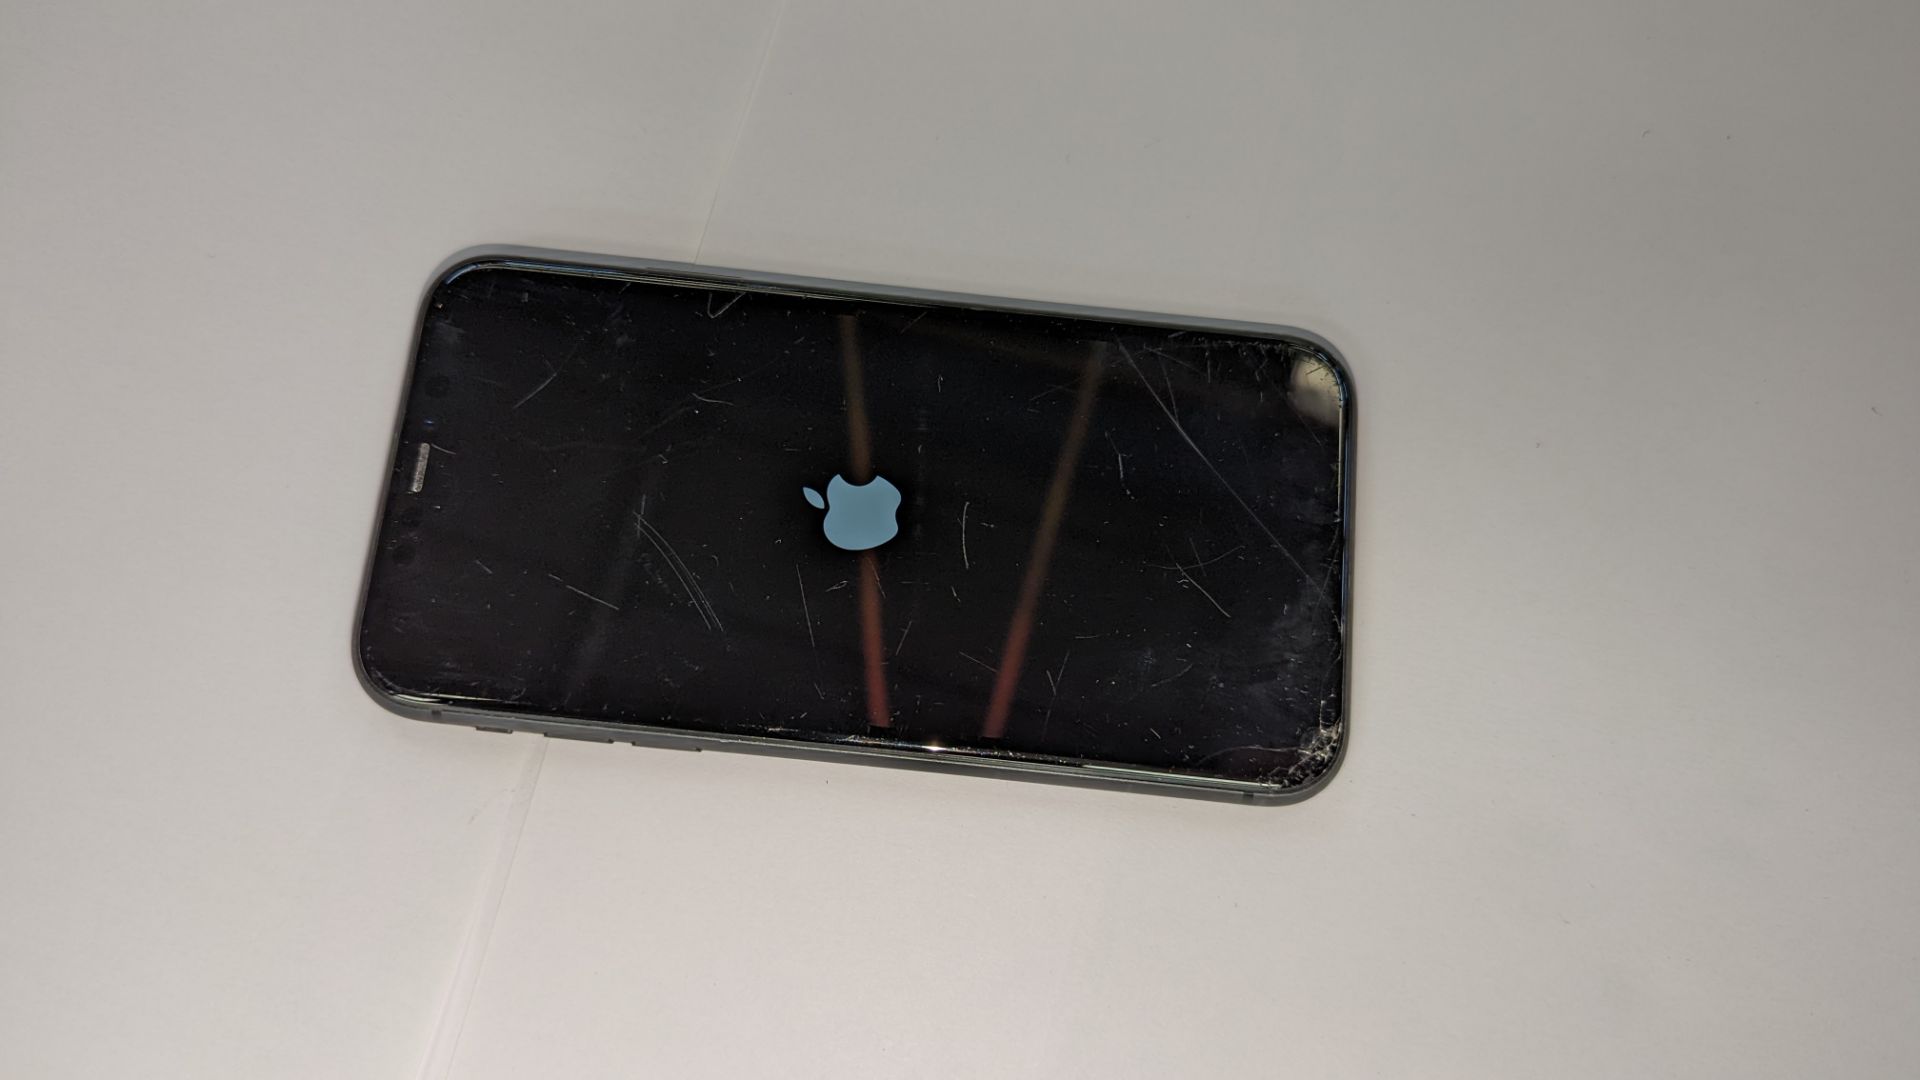 Apple iPhone 11, 64GB capacity, model A2221 (MWLT2B/A). NB1 damage/crack to screen. NB2 no box - Image 12 of 16